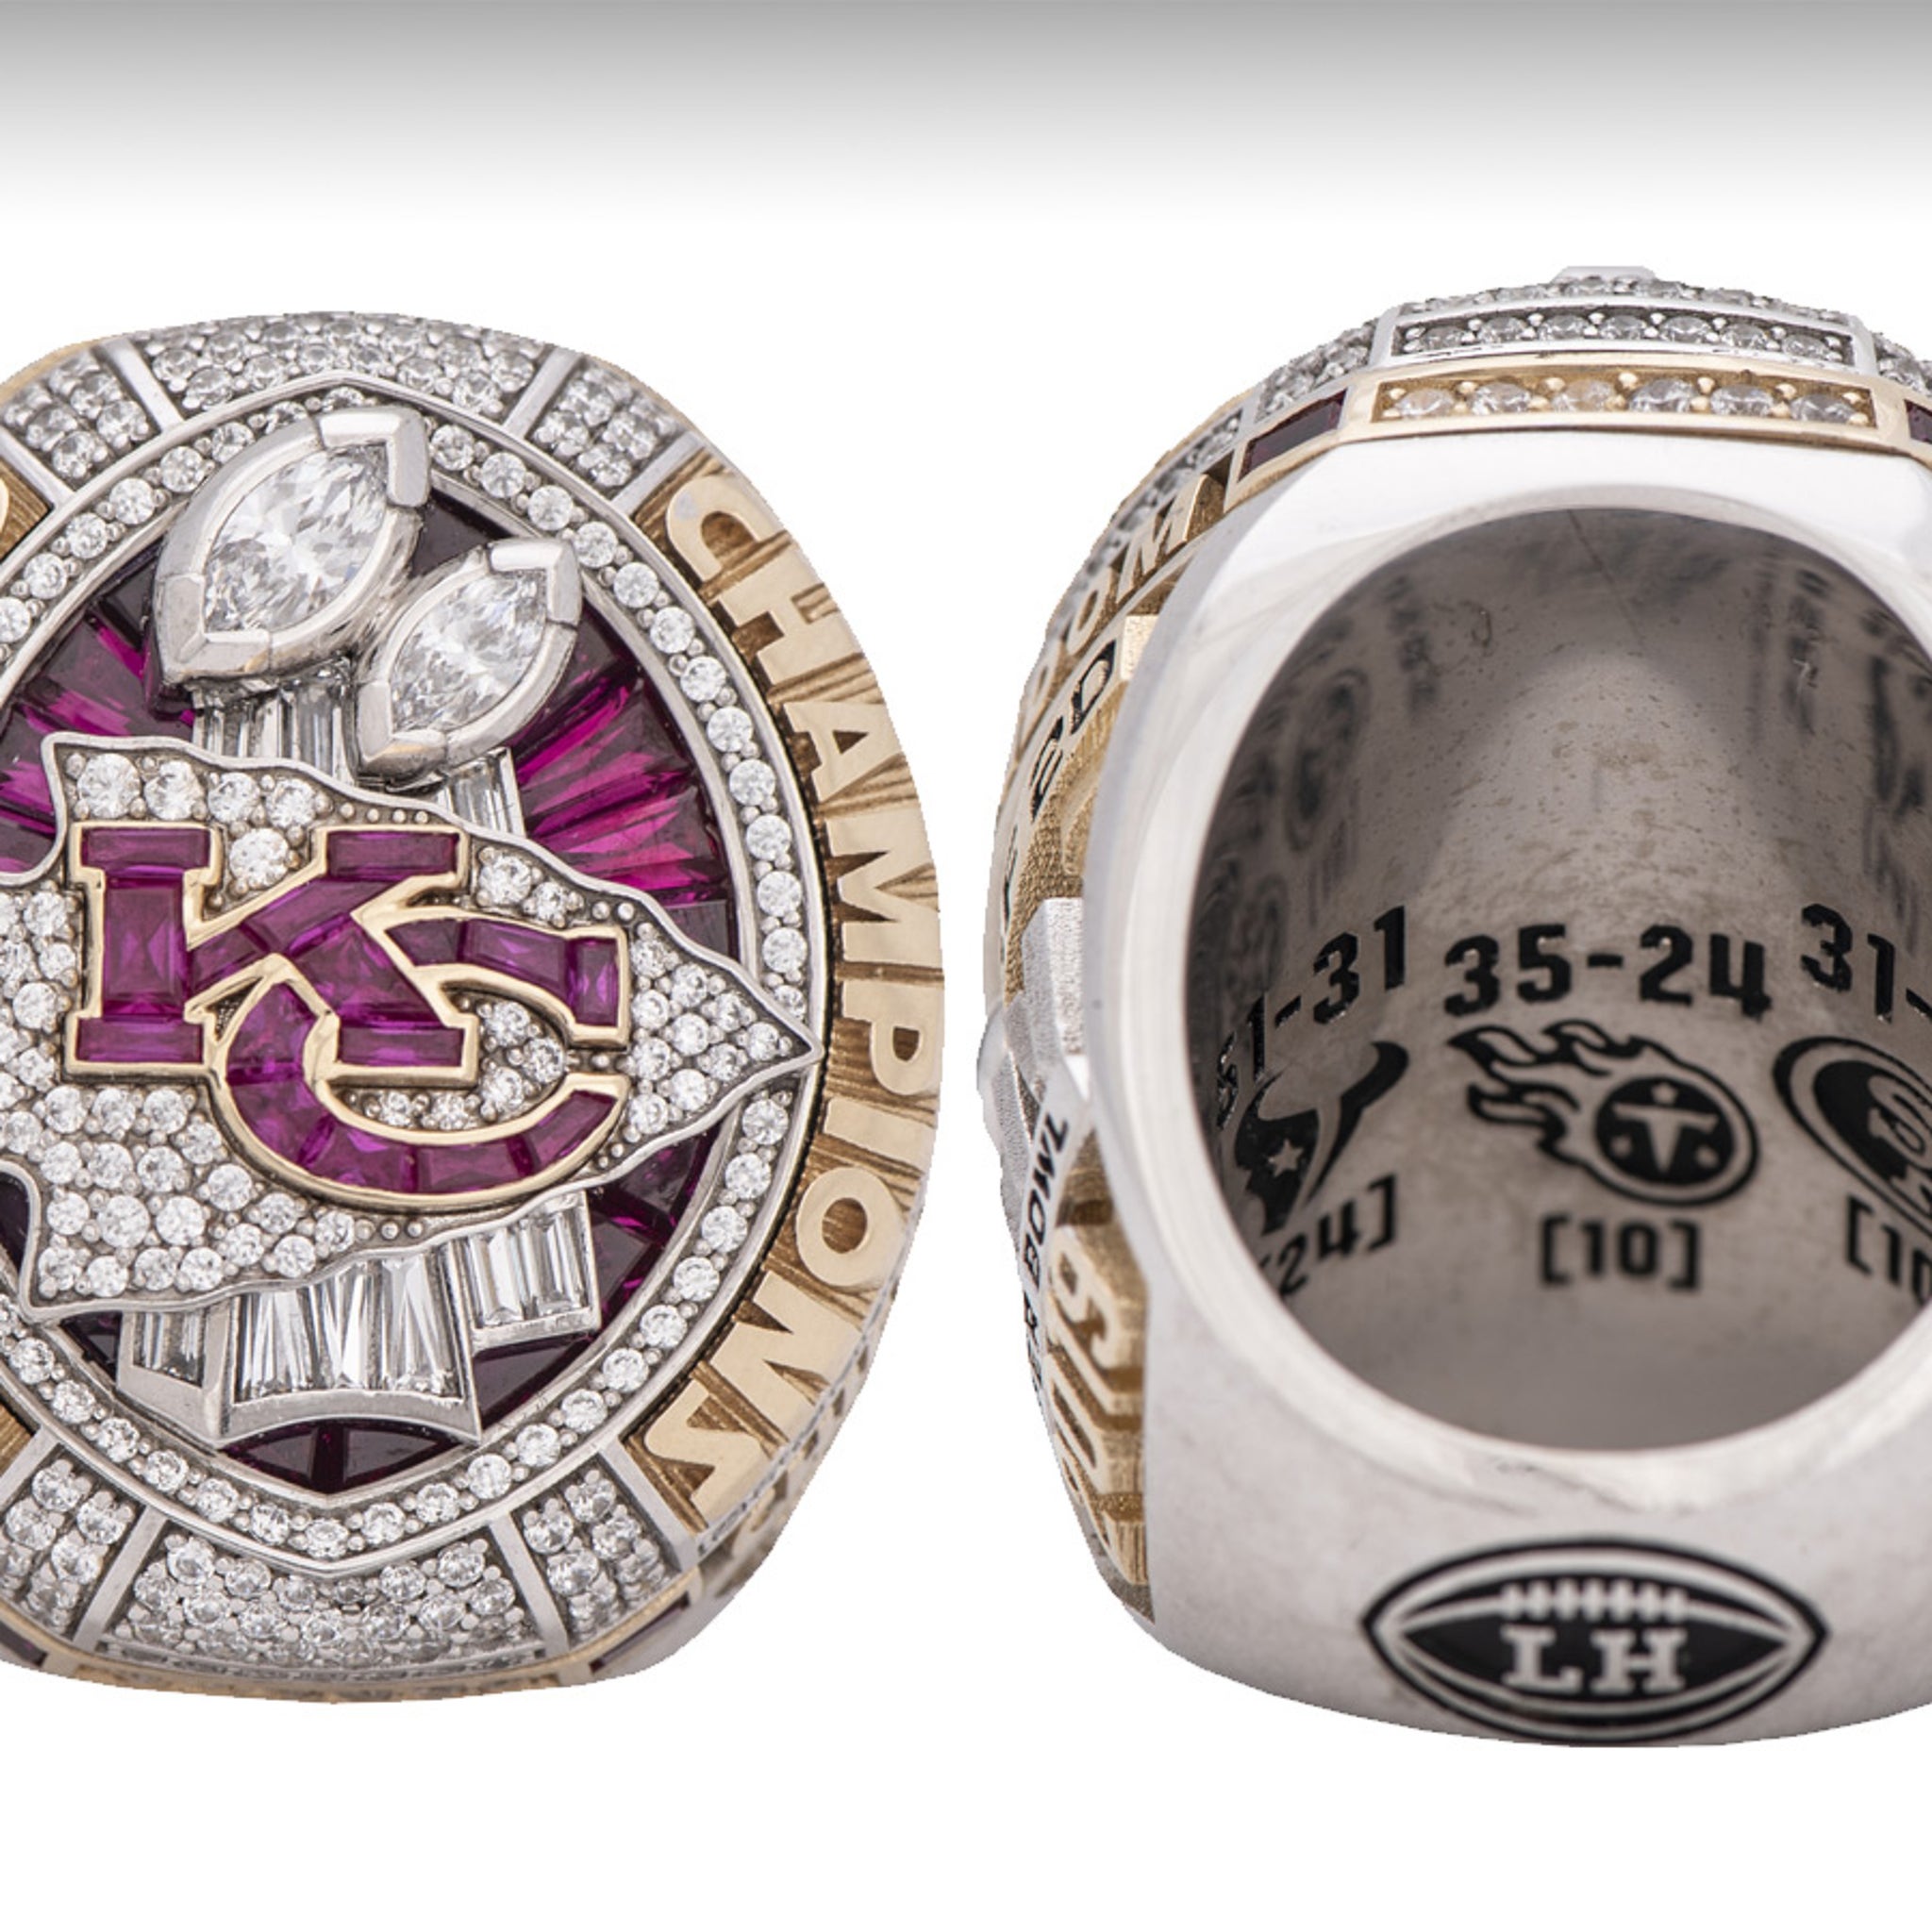 2020 chiefs afc championship ring